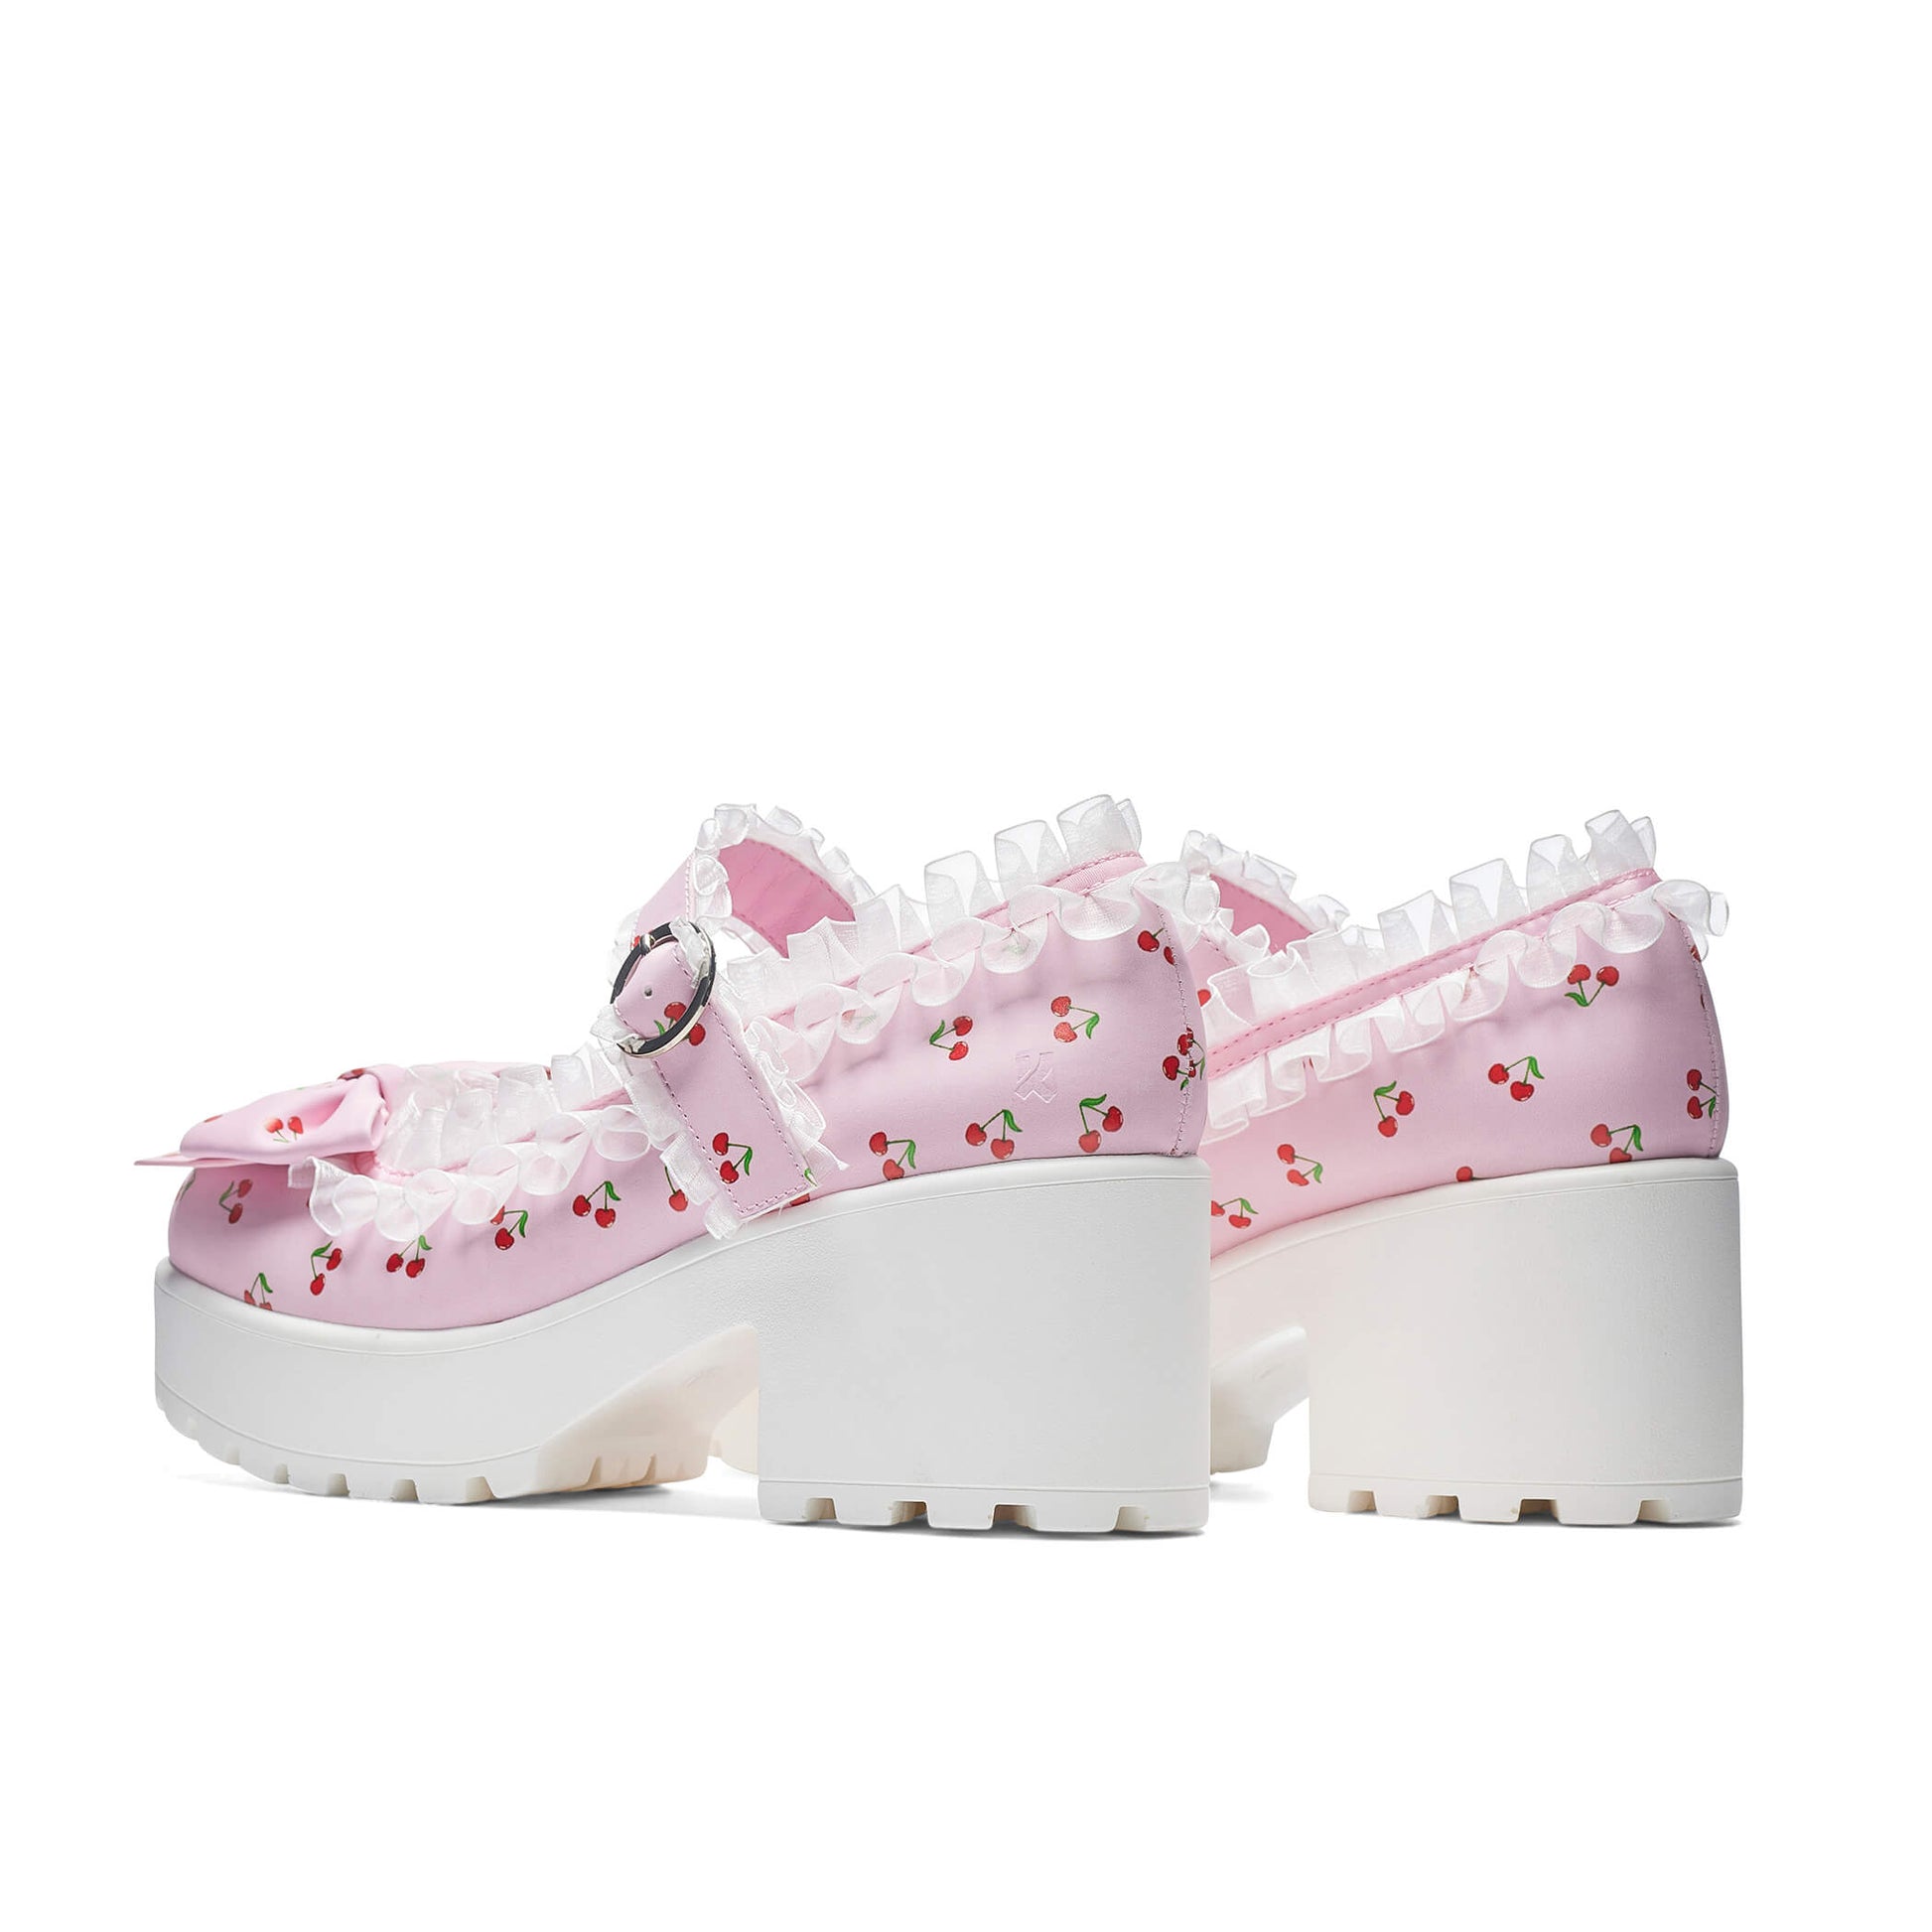 Tira Mary Janes Shoes 'Pink Cherry Bakewell Edition' - Mary Janes - KOI Footwear - Pink - Back View